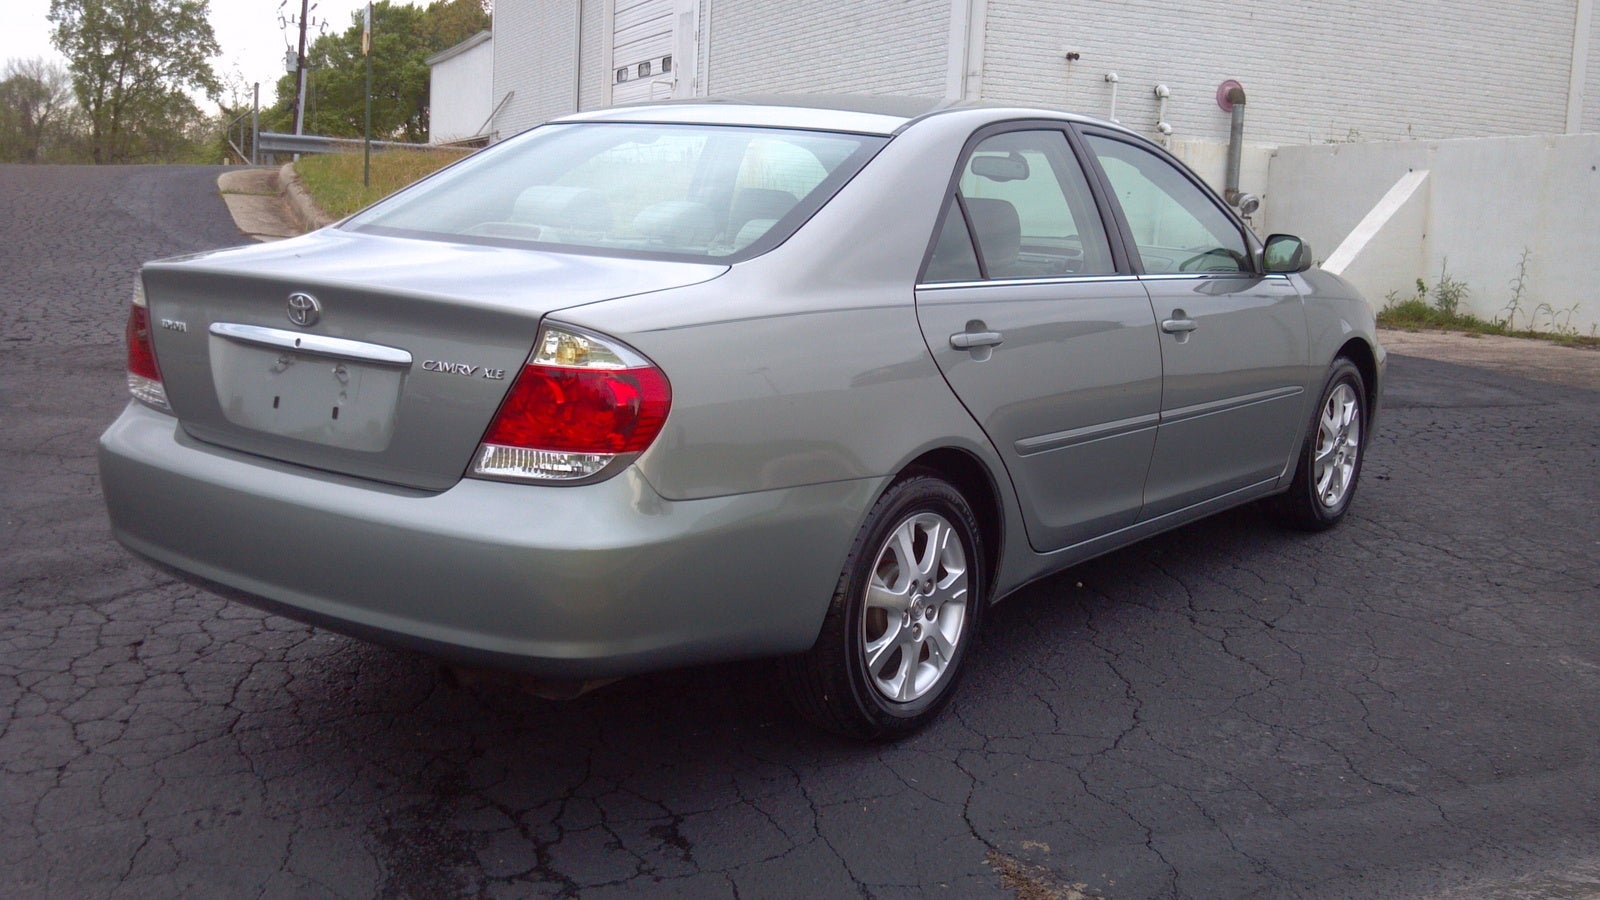 2005_toyota_camry_xle pic 7589089621368153296